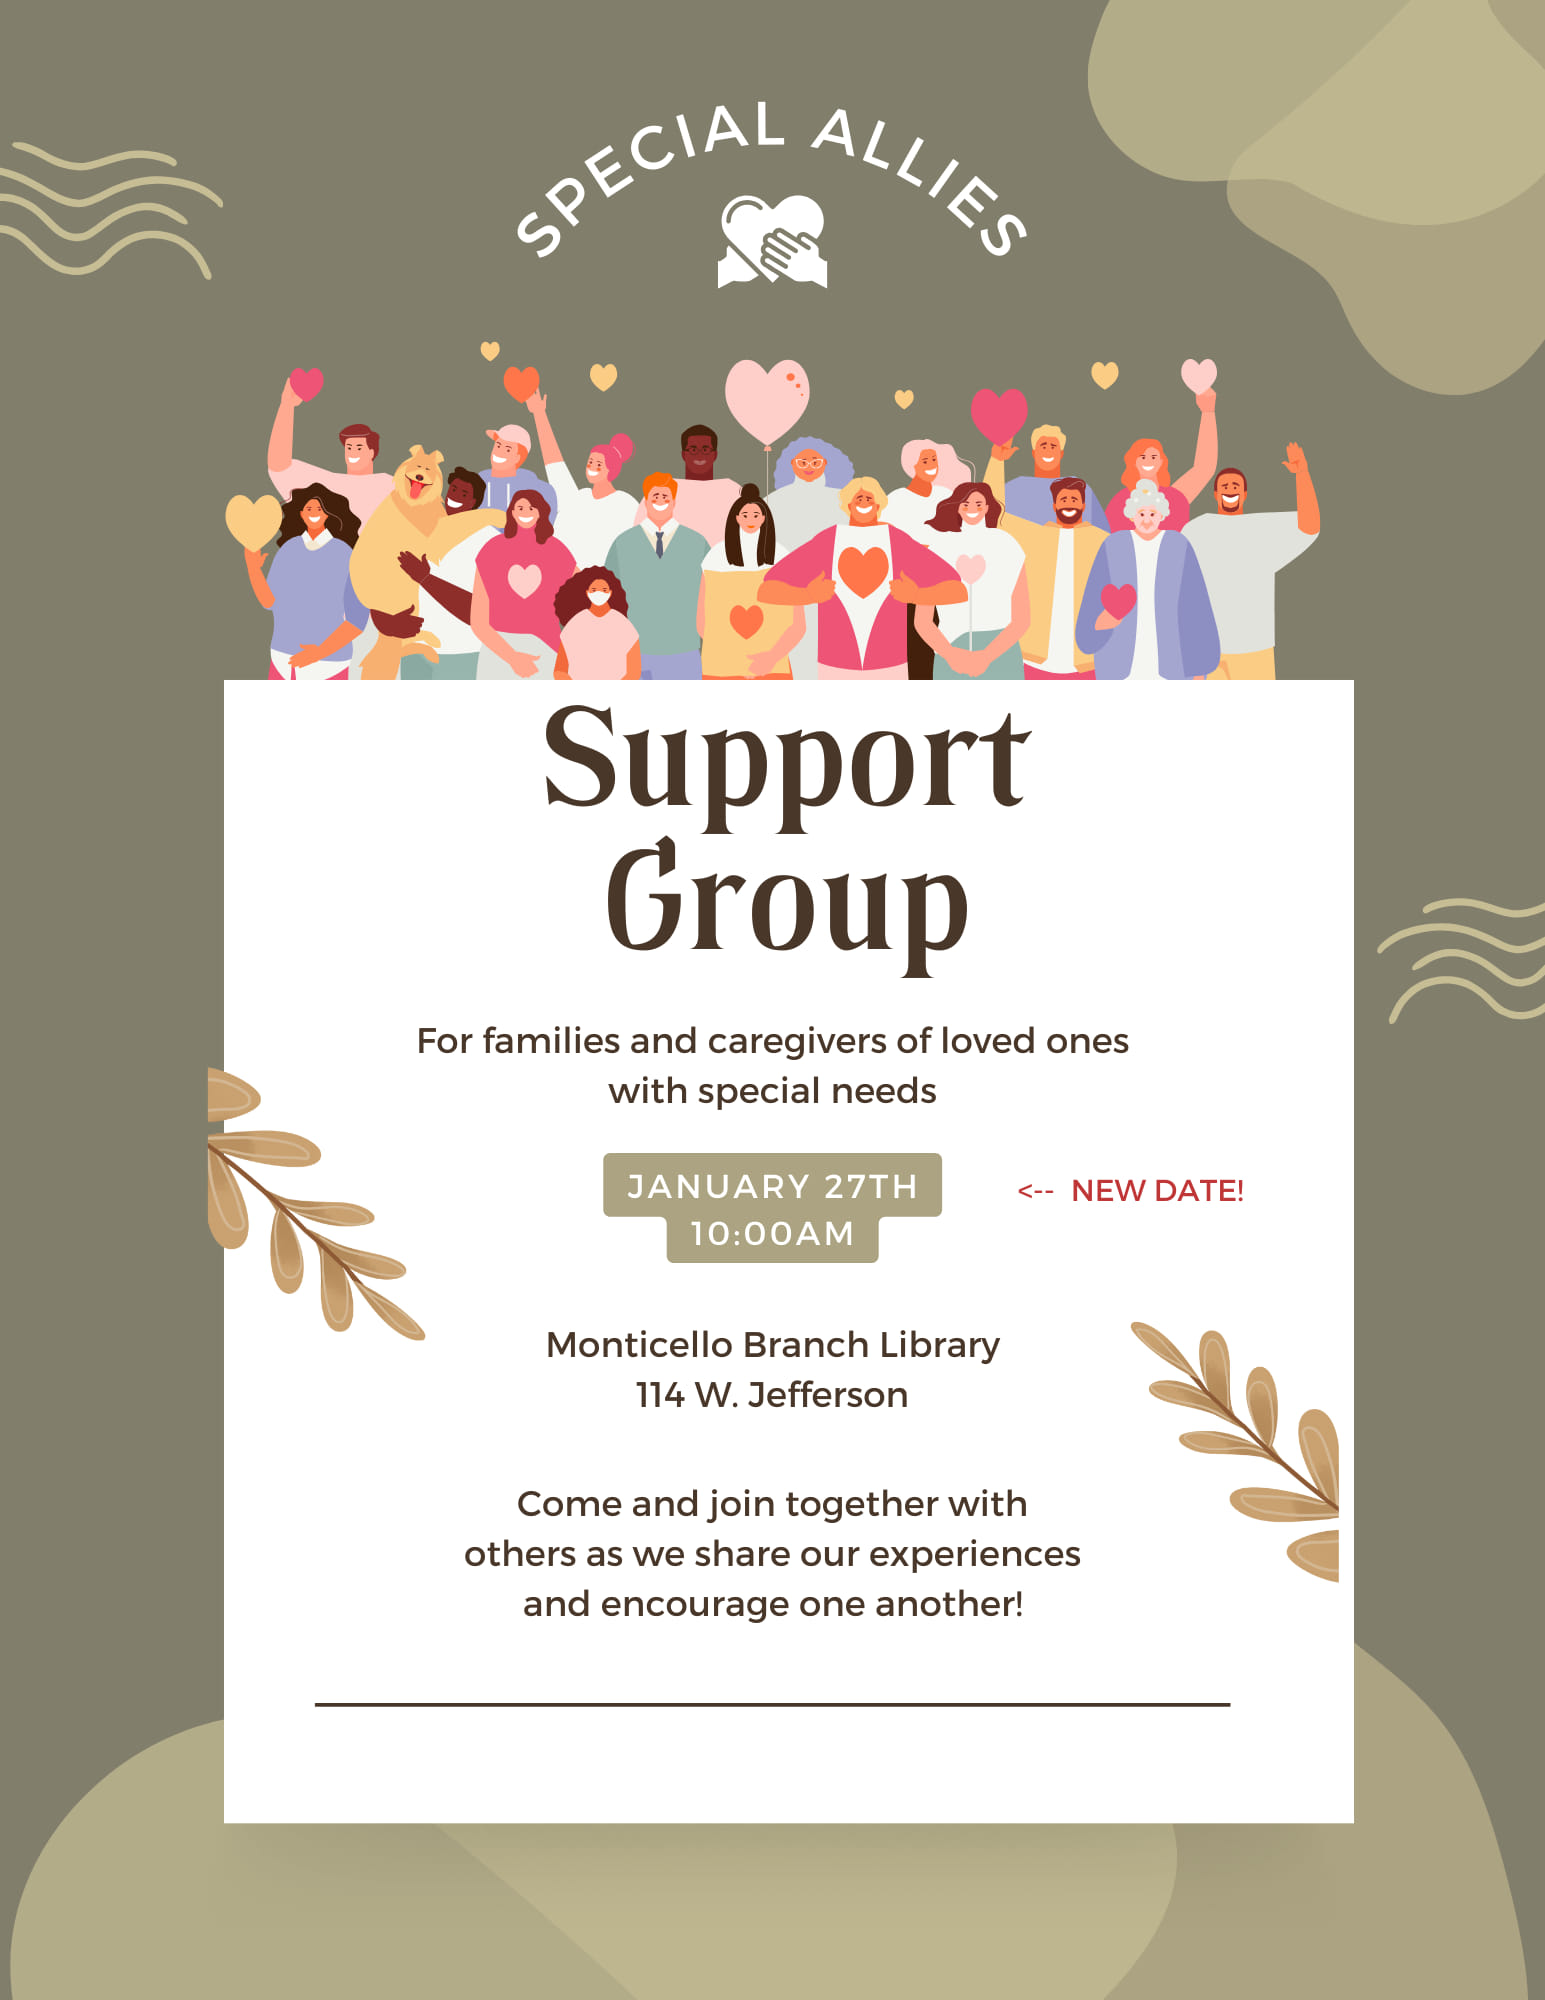 Special Allies Support Group Meeting Jan 2024